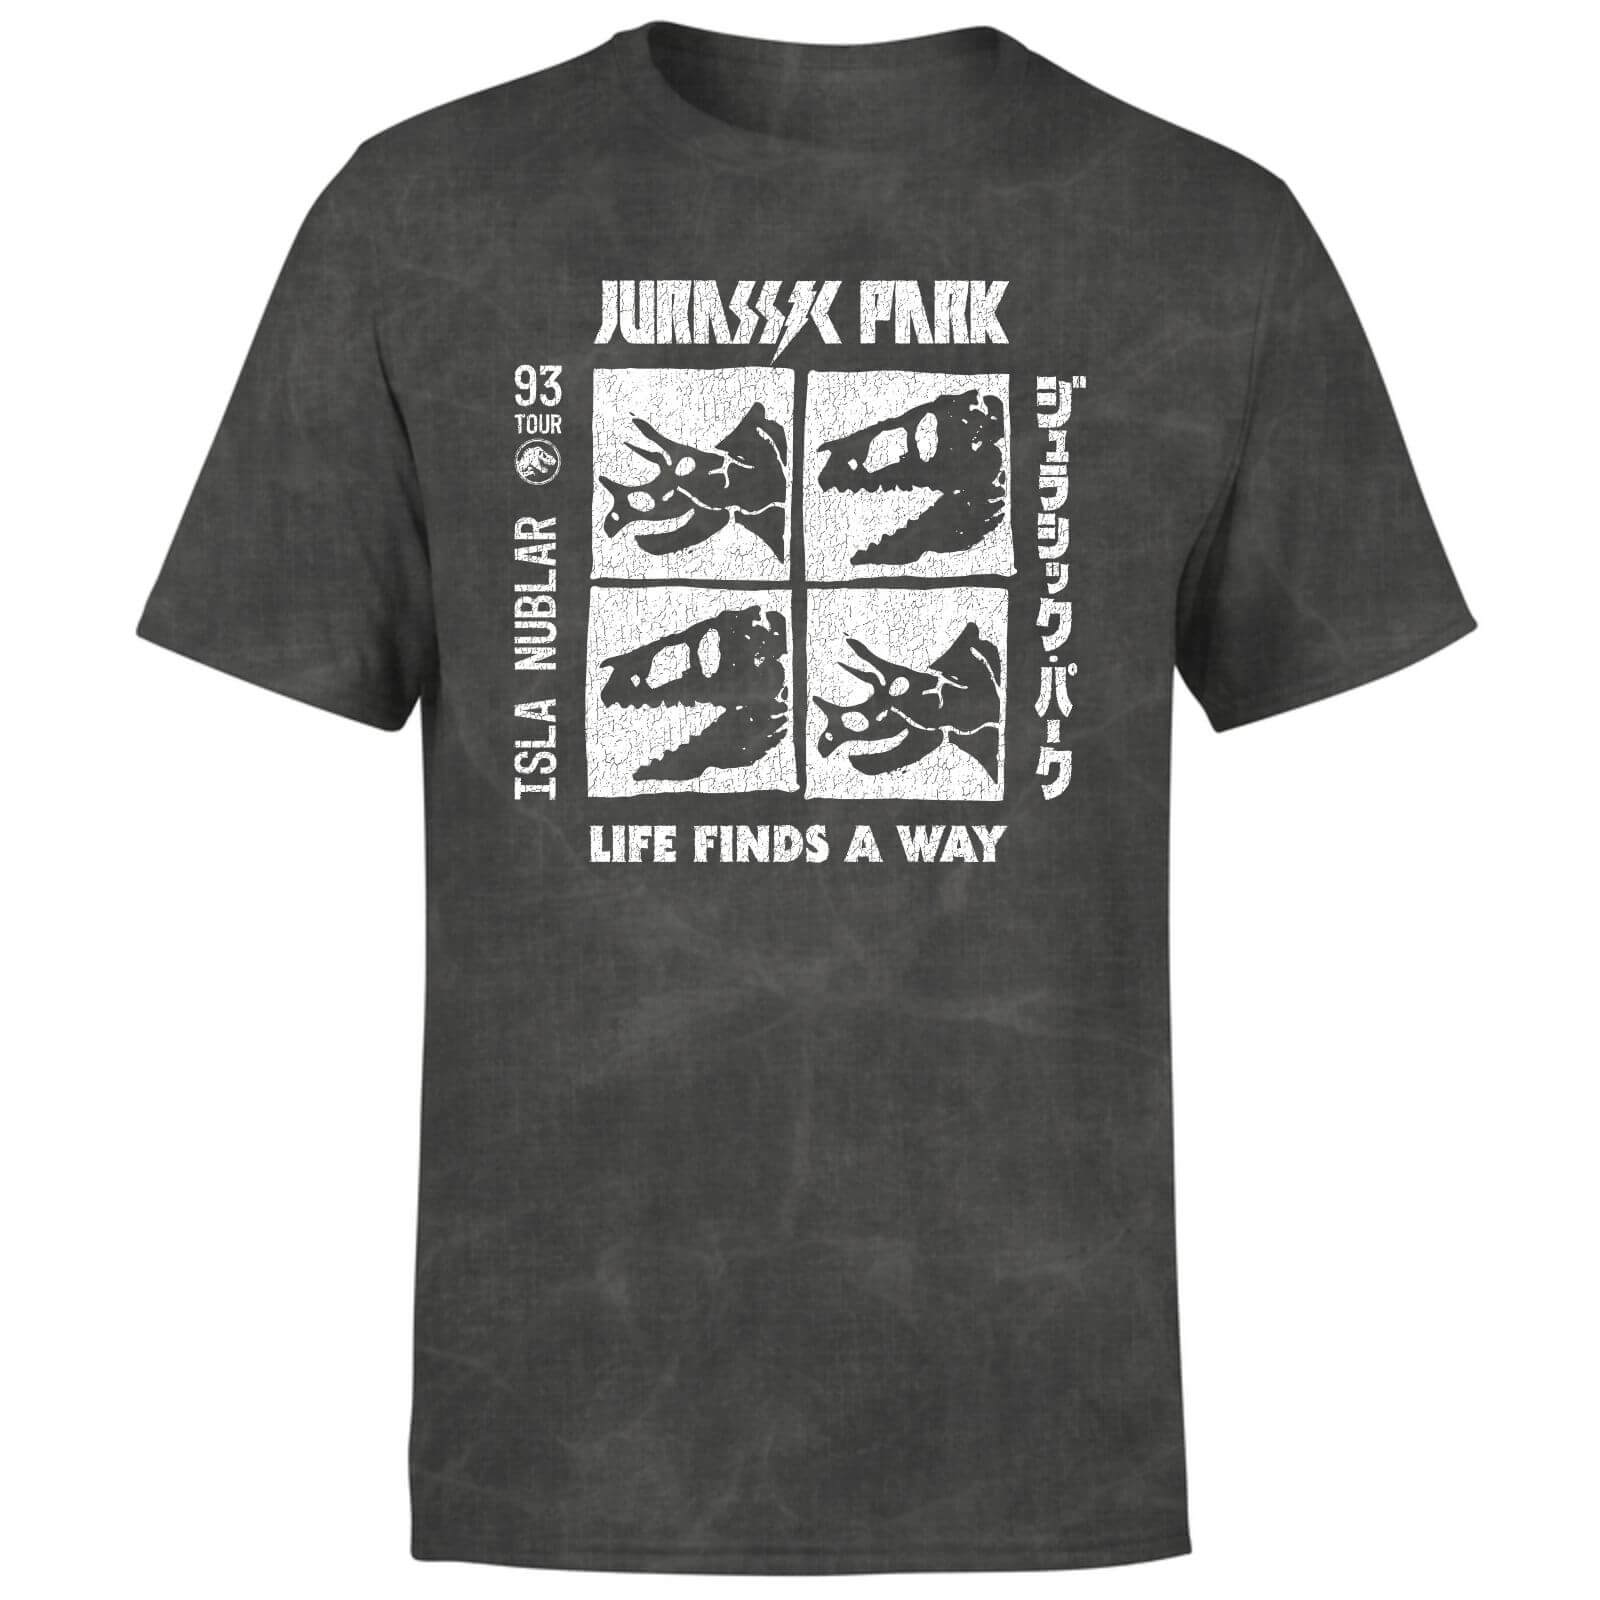 View the best prices for: jurassic park the faces unisex t-shirt